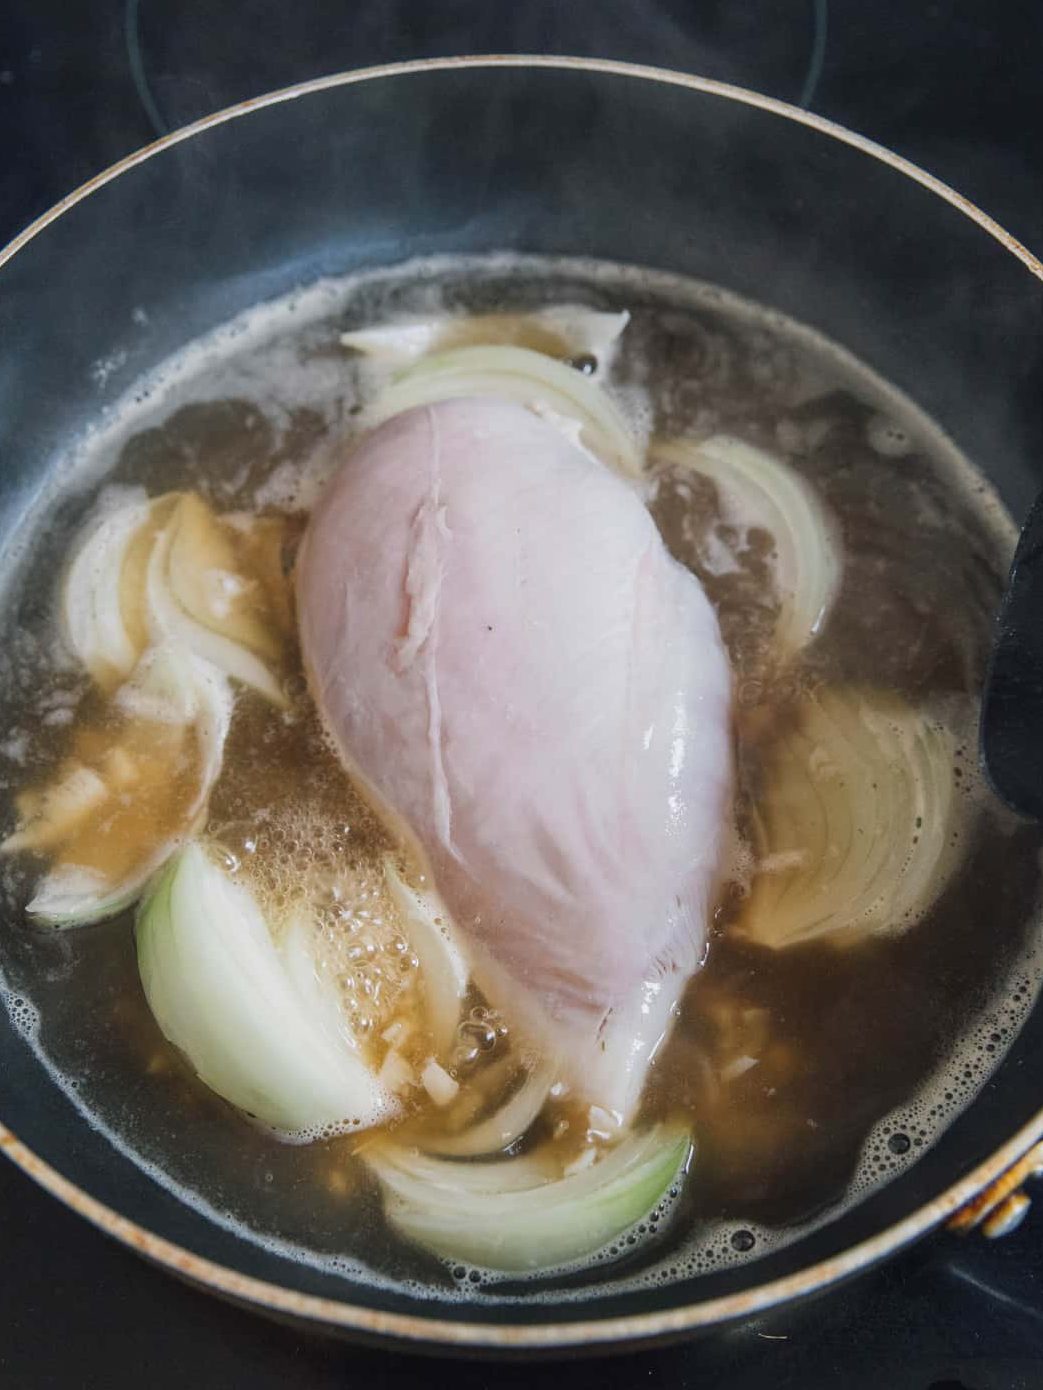 Place a pot on the stove over medium-high heat and pour in the chicken broth, and minced garlic, onion and place the chicken breasts. 